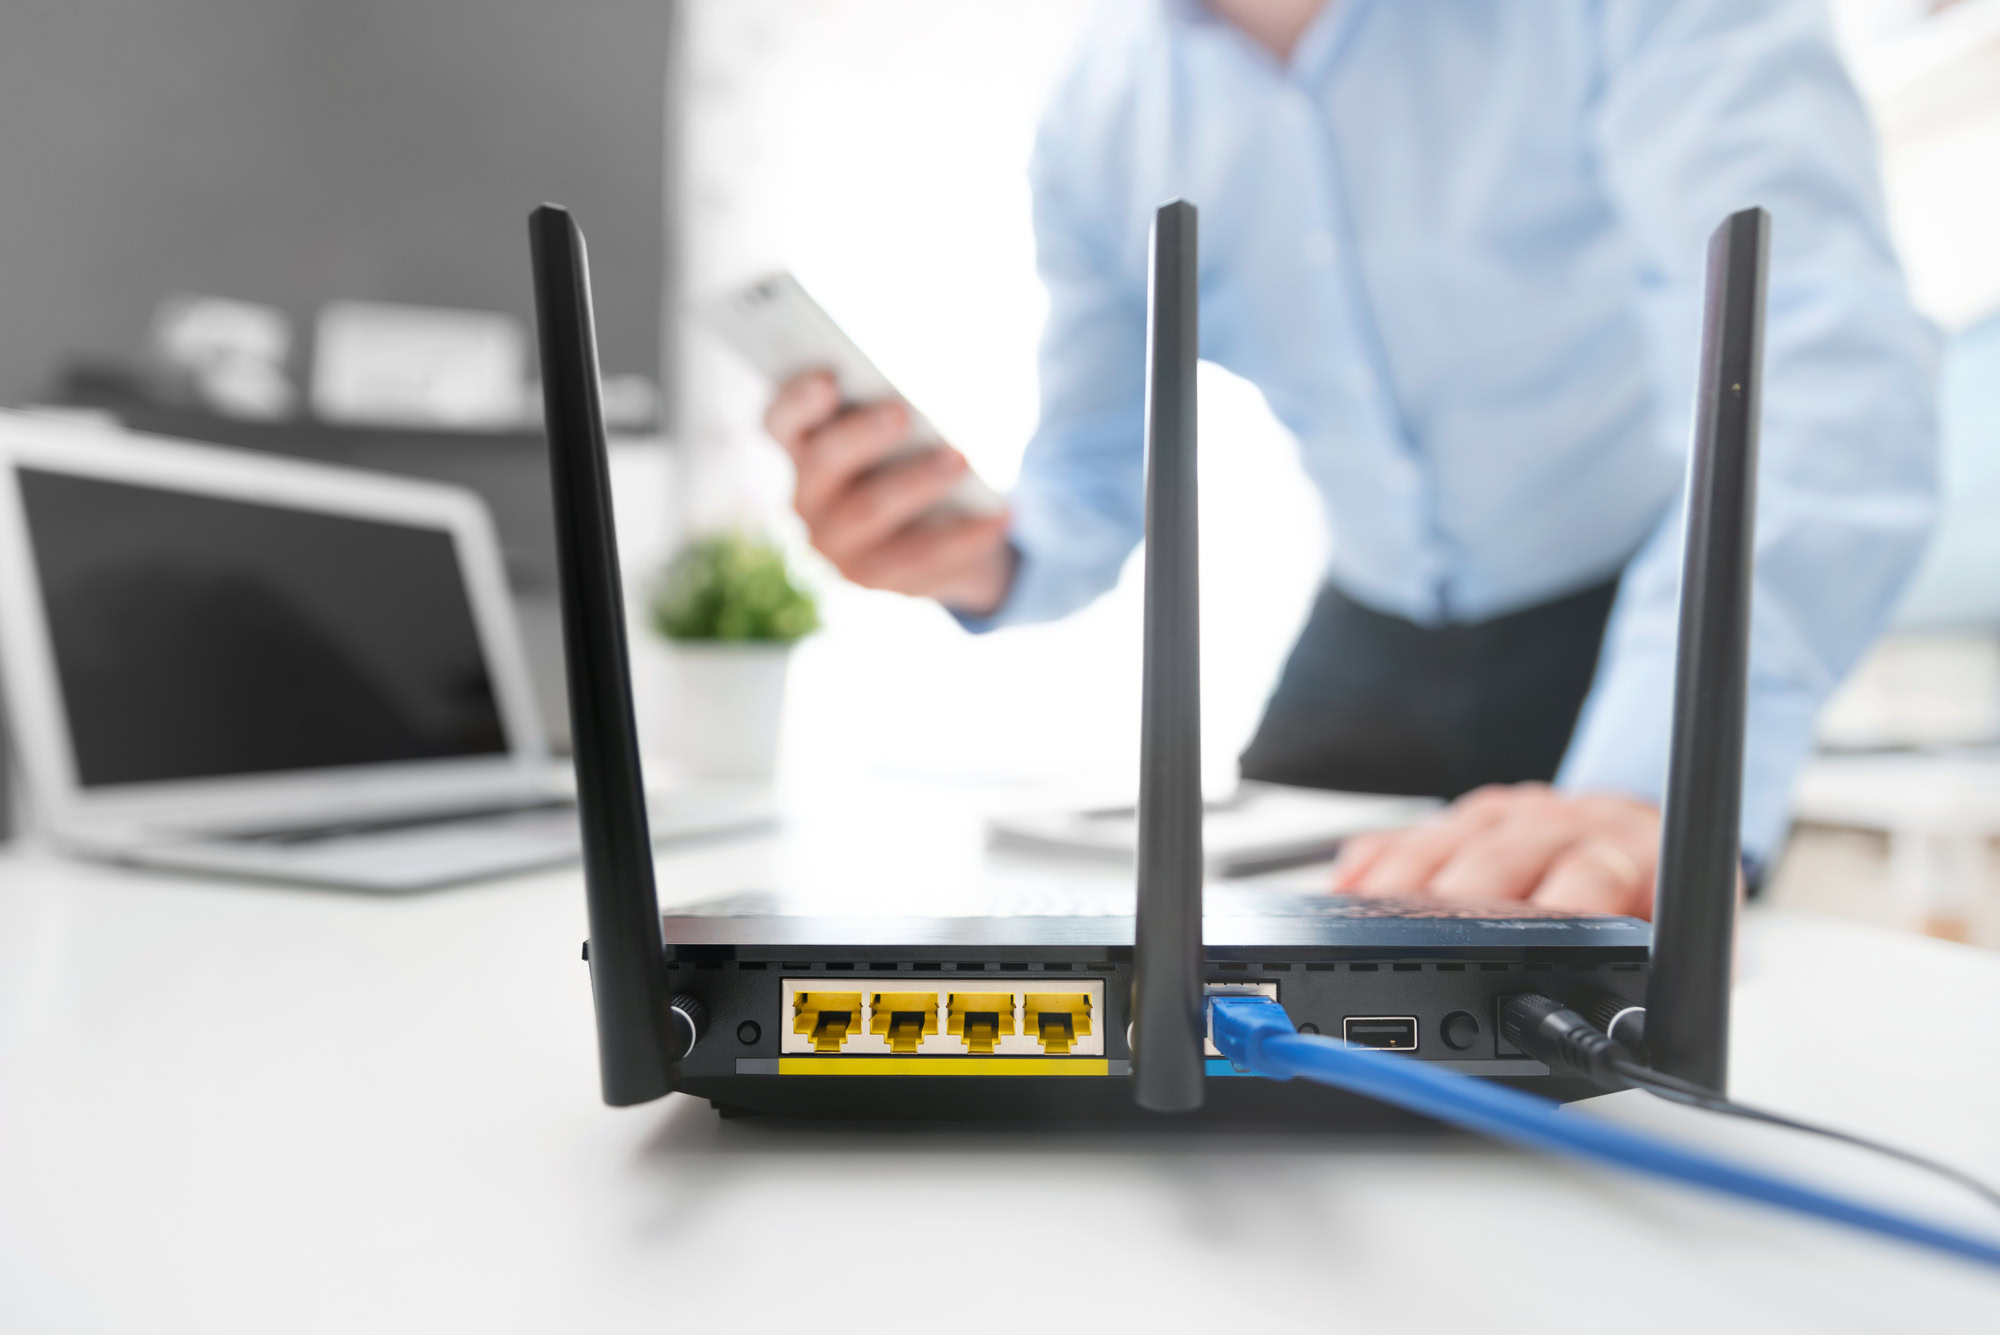 network problems due to inadequate Wi-fi router